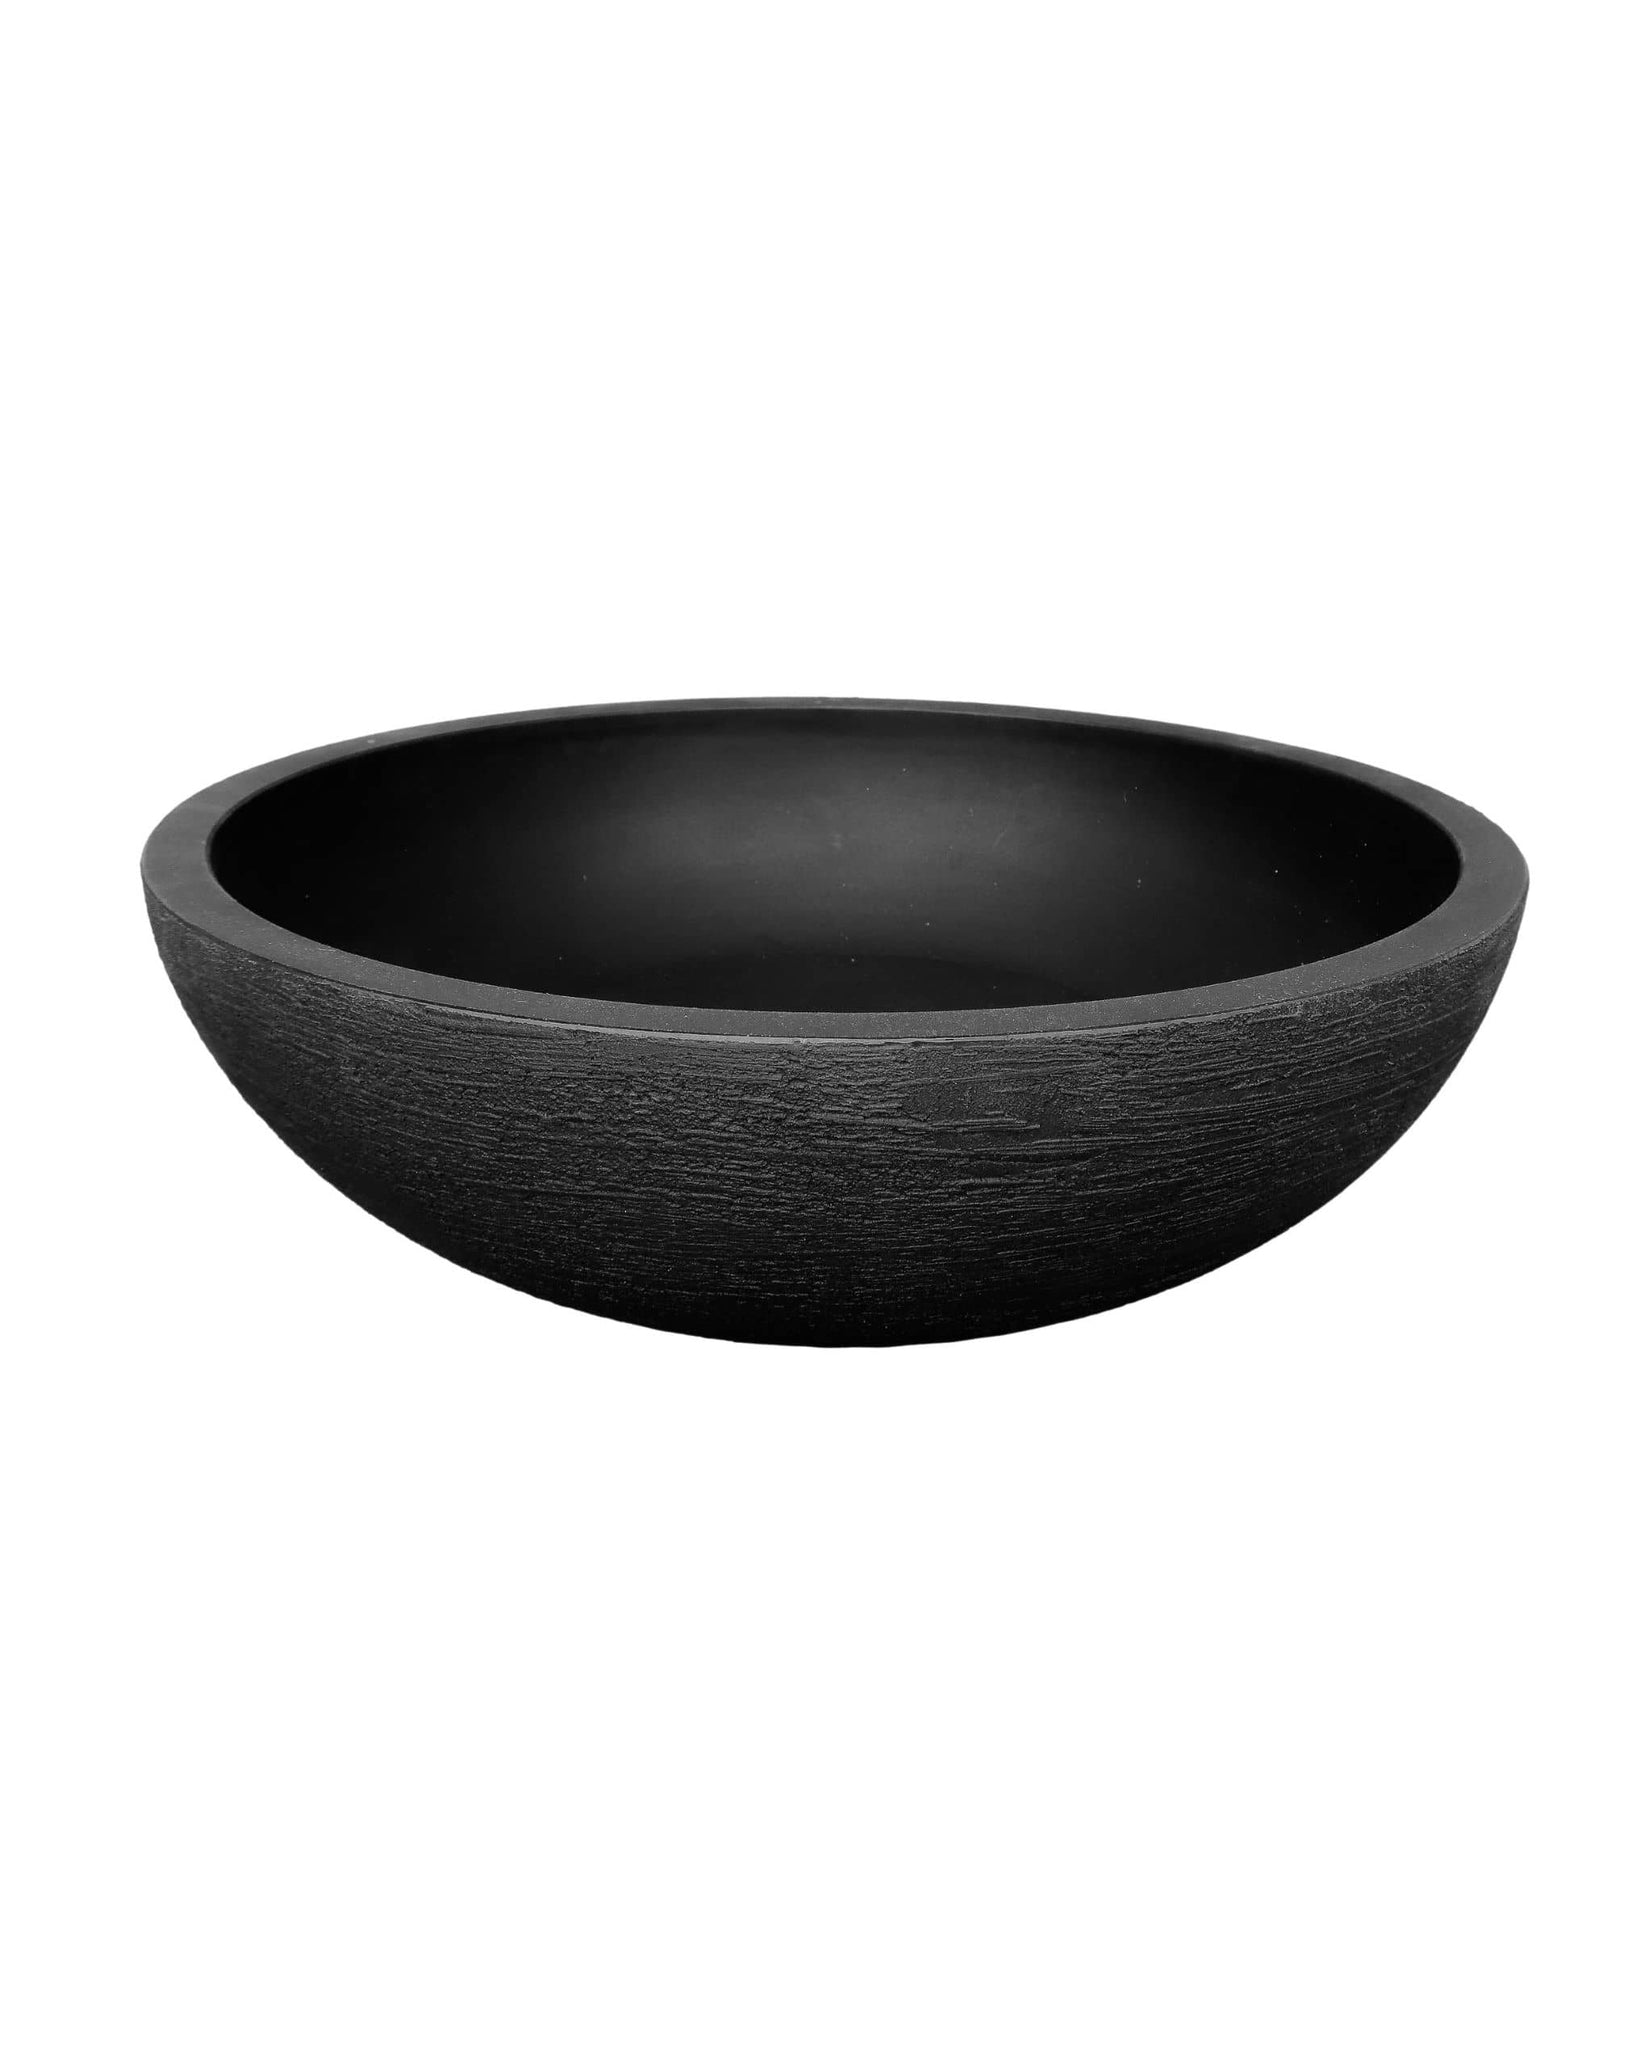 European Japi Bowl Double Walled. on Trend planting bowl, colour lead. Textured finish. Can also use as a Zen bowl. Very versatile.